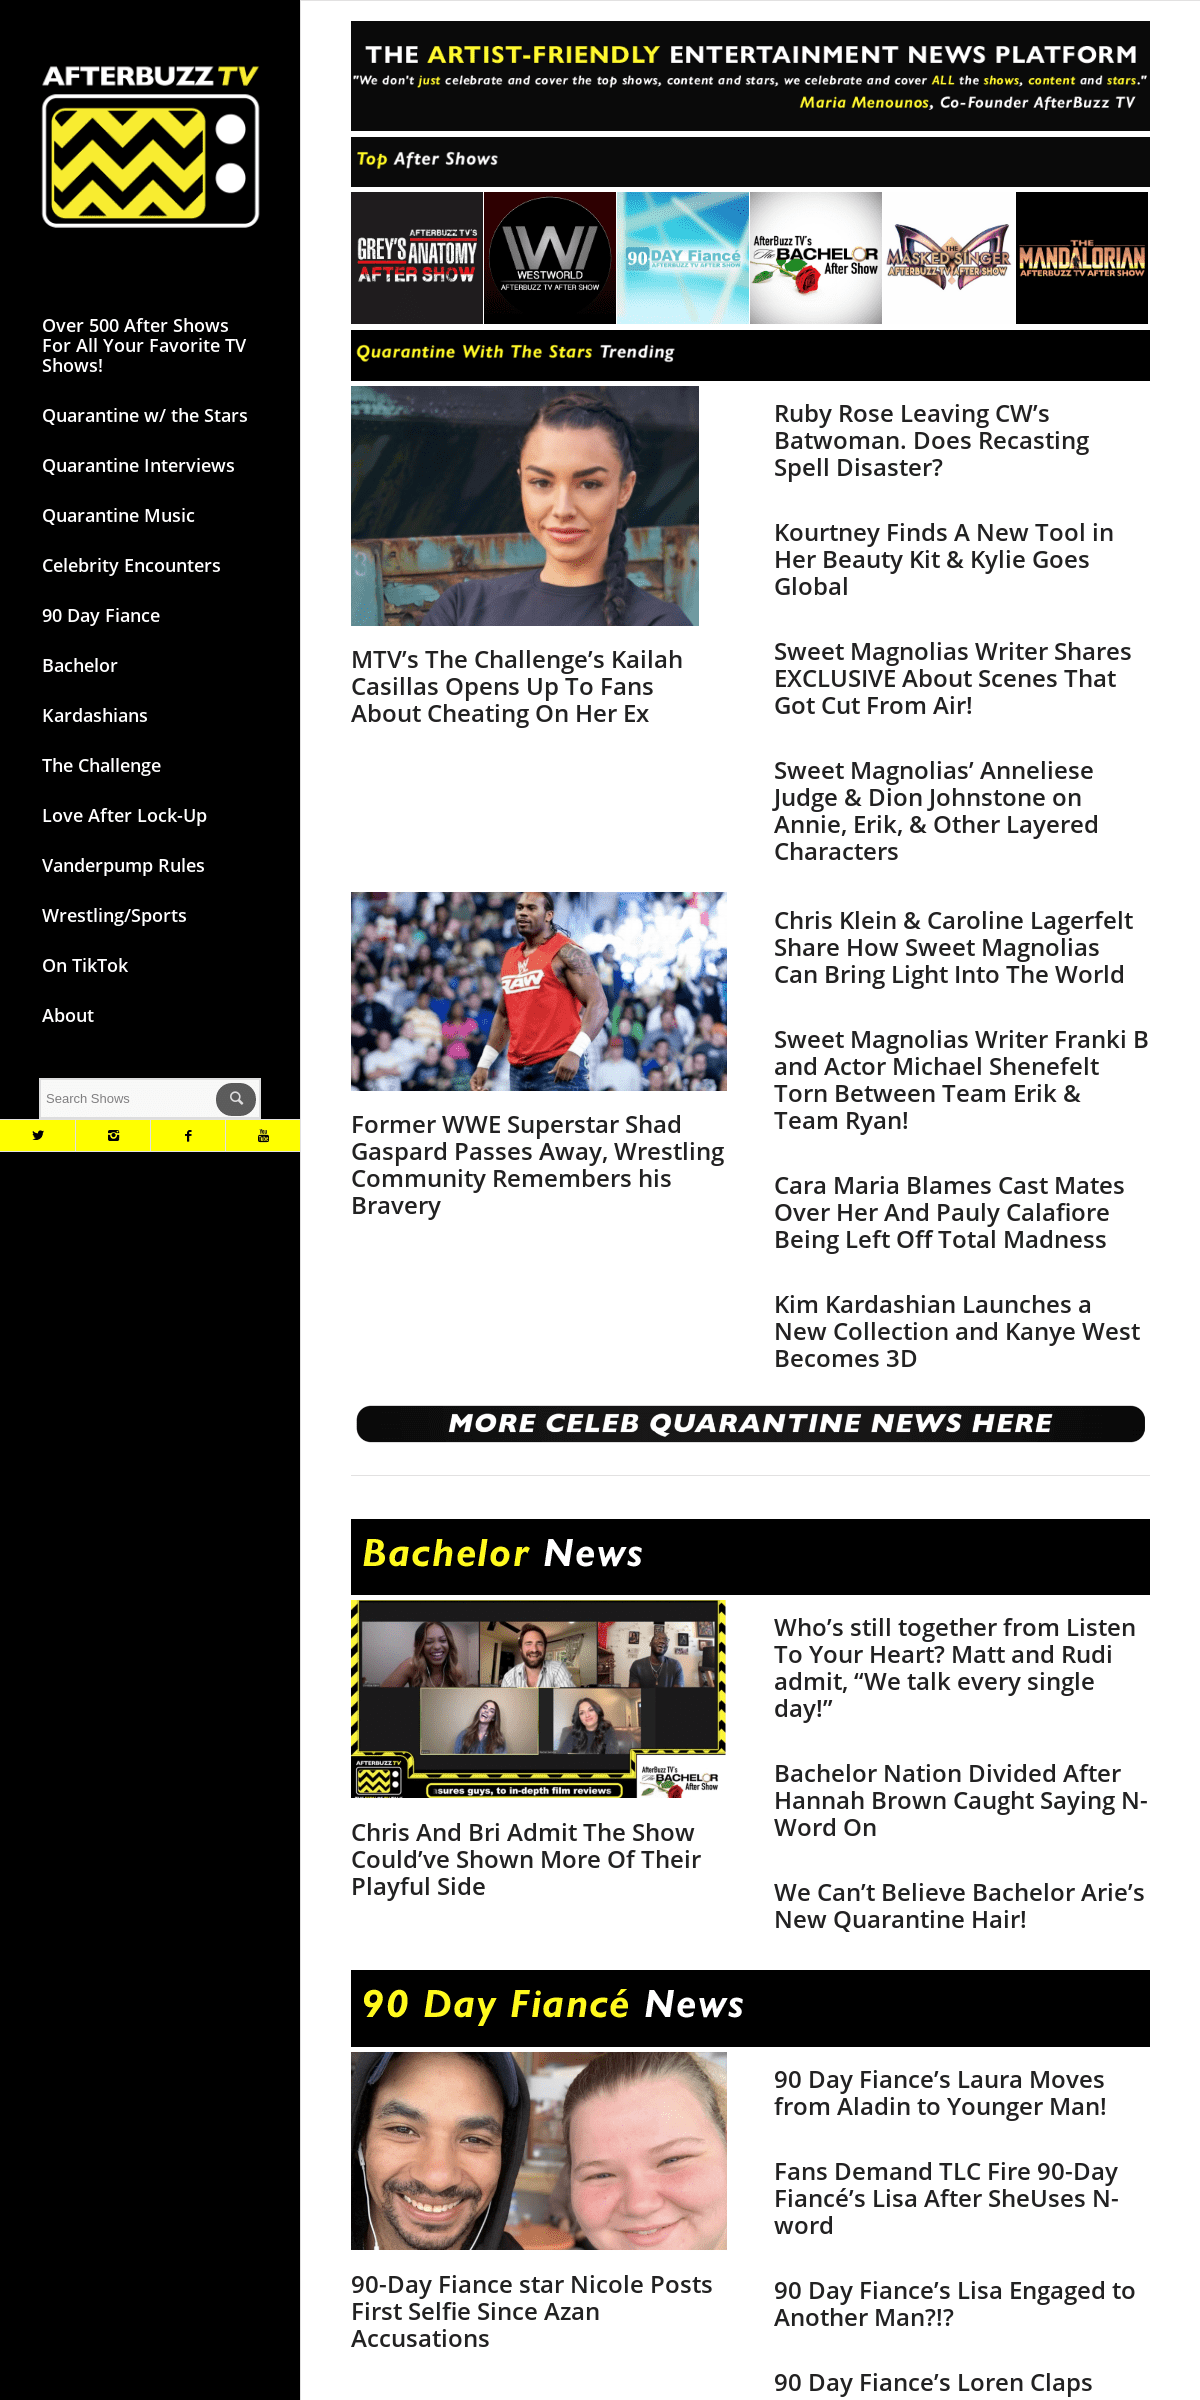 A complete backup of afterbuzztv.com